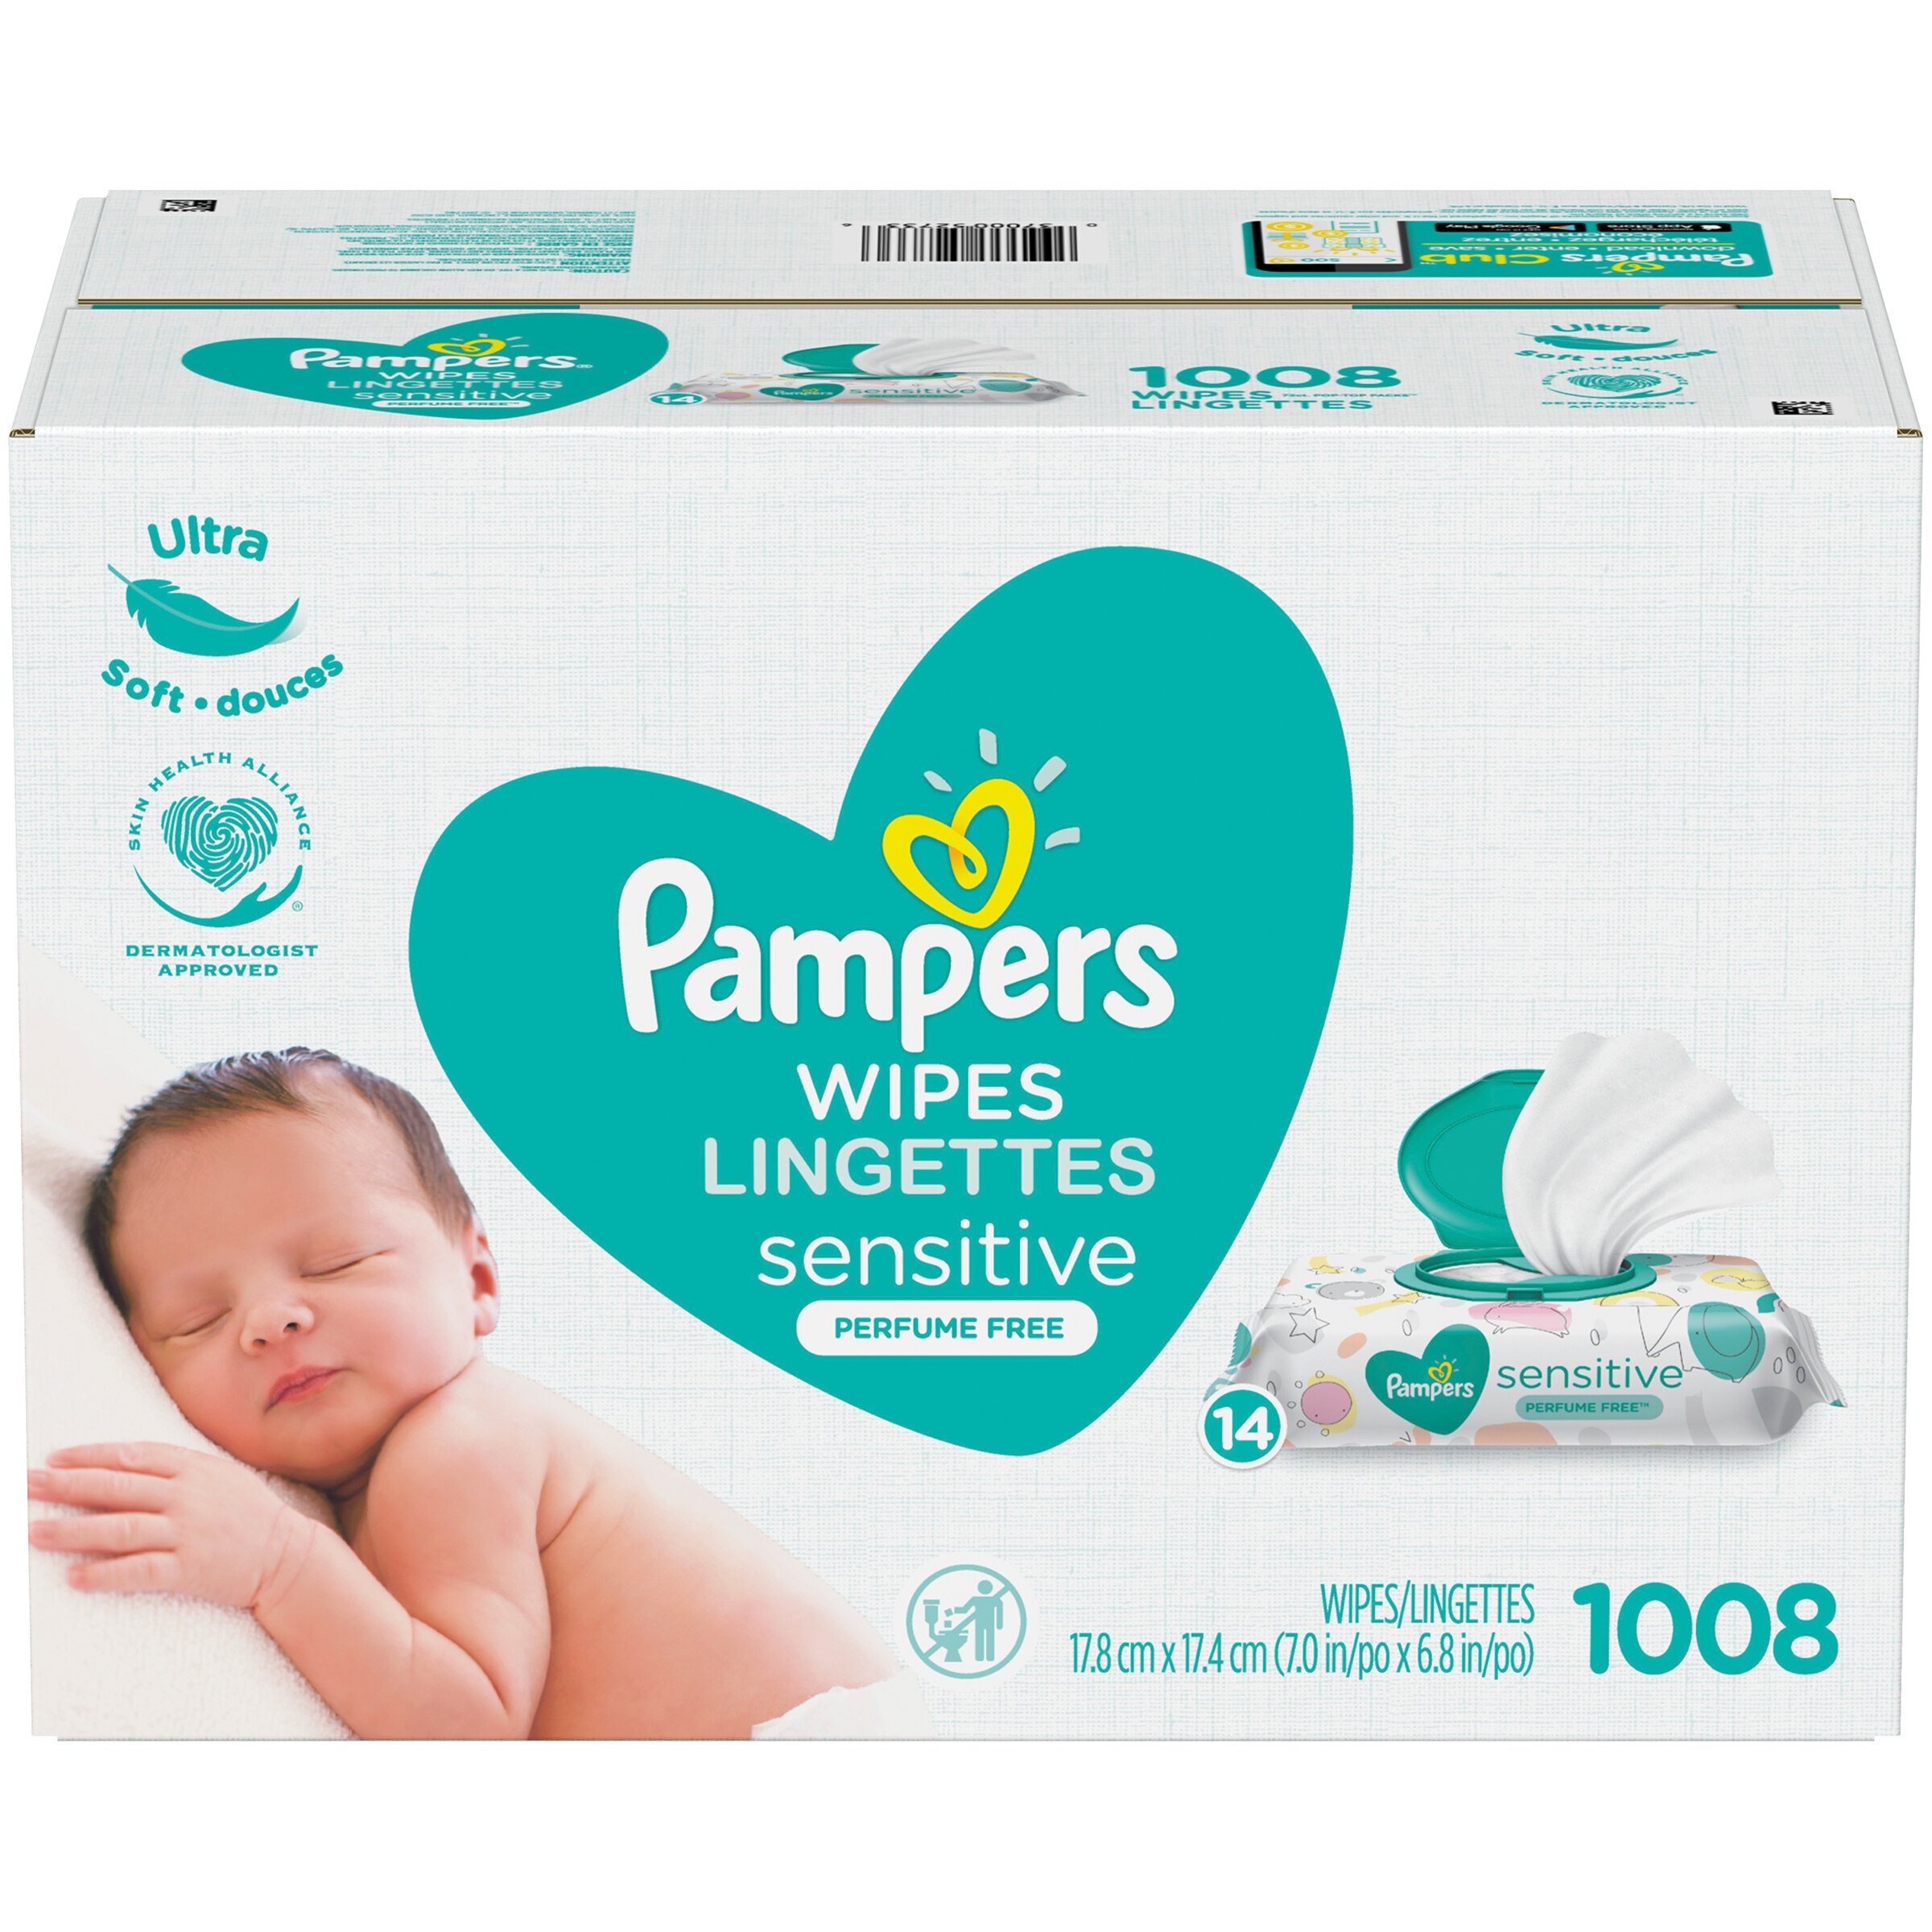 Pampers Baby Wipes Sensitive Perfume Free 14X Pop